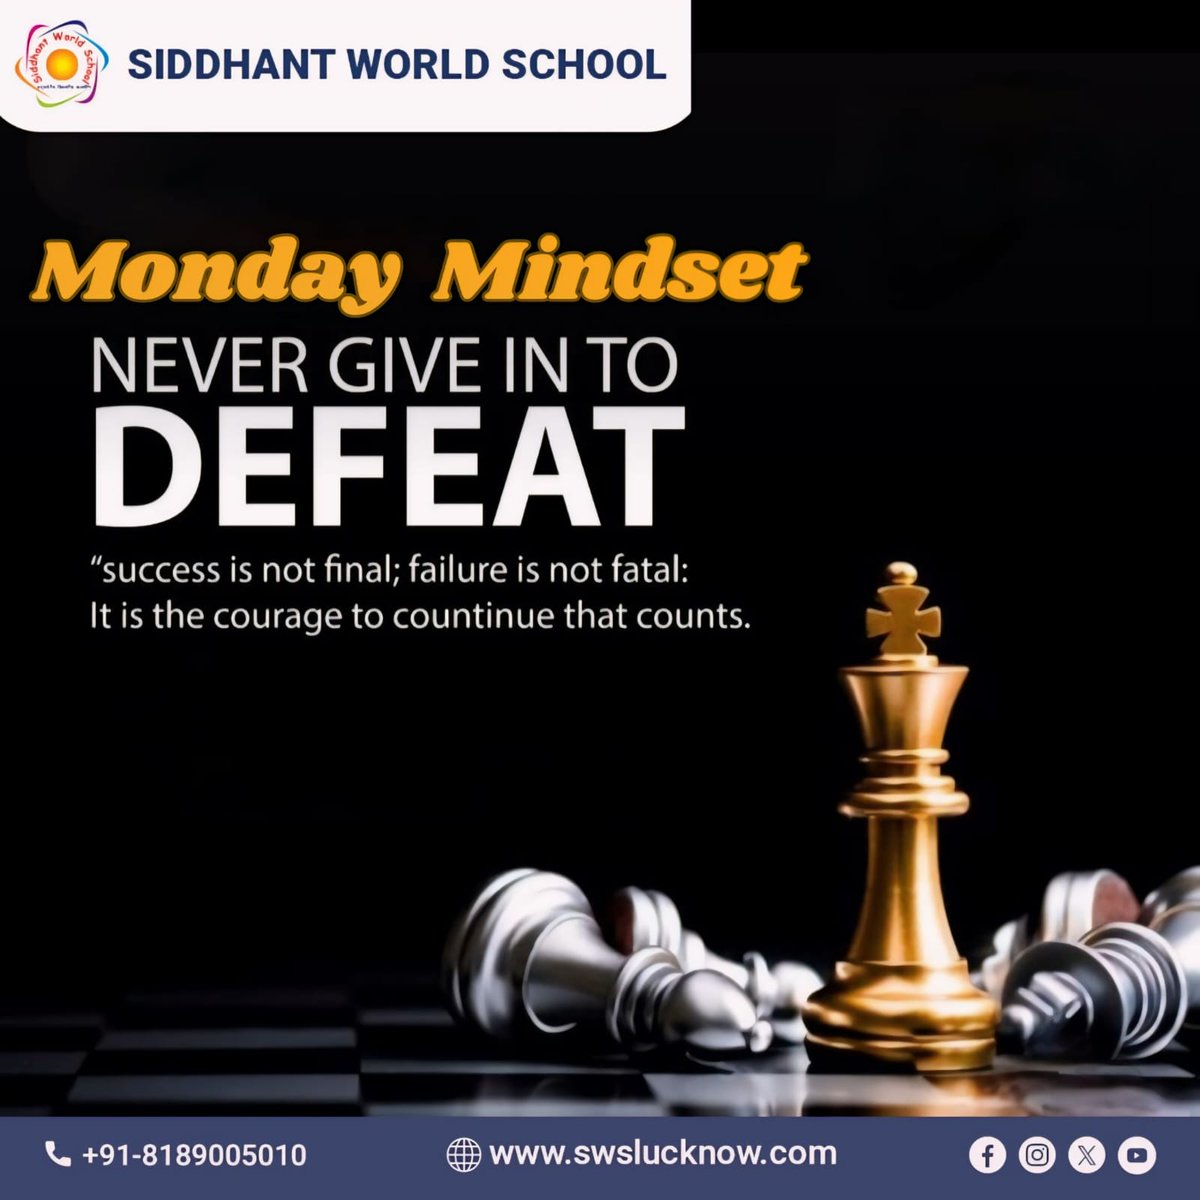 Never surrender to defeat. Success isn't permanent, failure isn't fatal; it's the courage to continue that truly defines your journey and leads to victory.

Visit us: swslucknow.com 

#MondayMindset #mondaymotivation #bestschoolnearme #CBSE #CBSESchool #learning